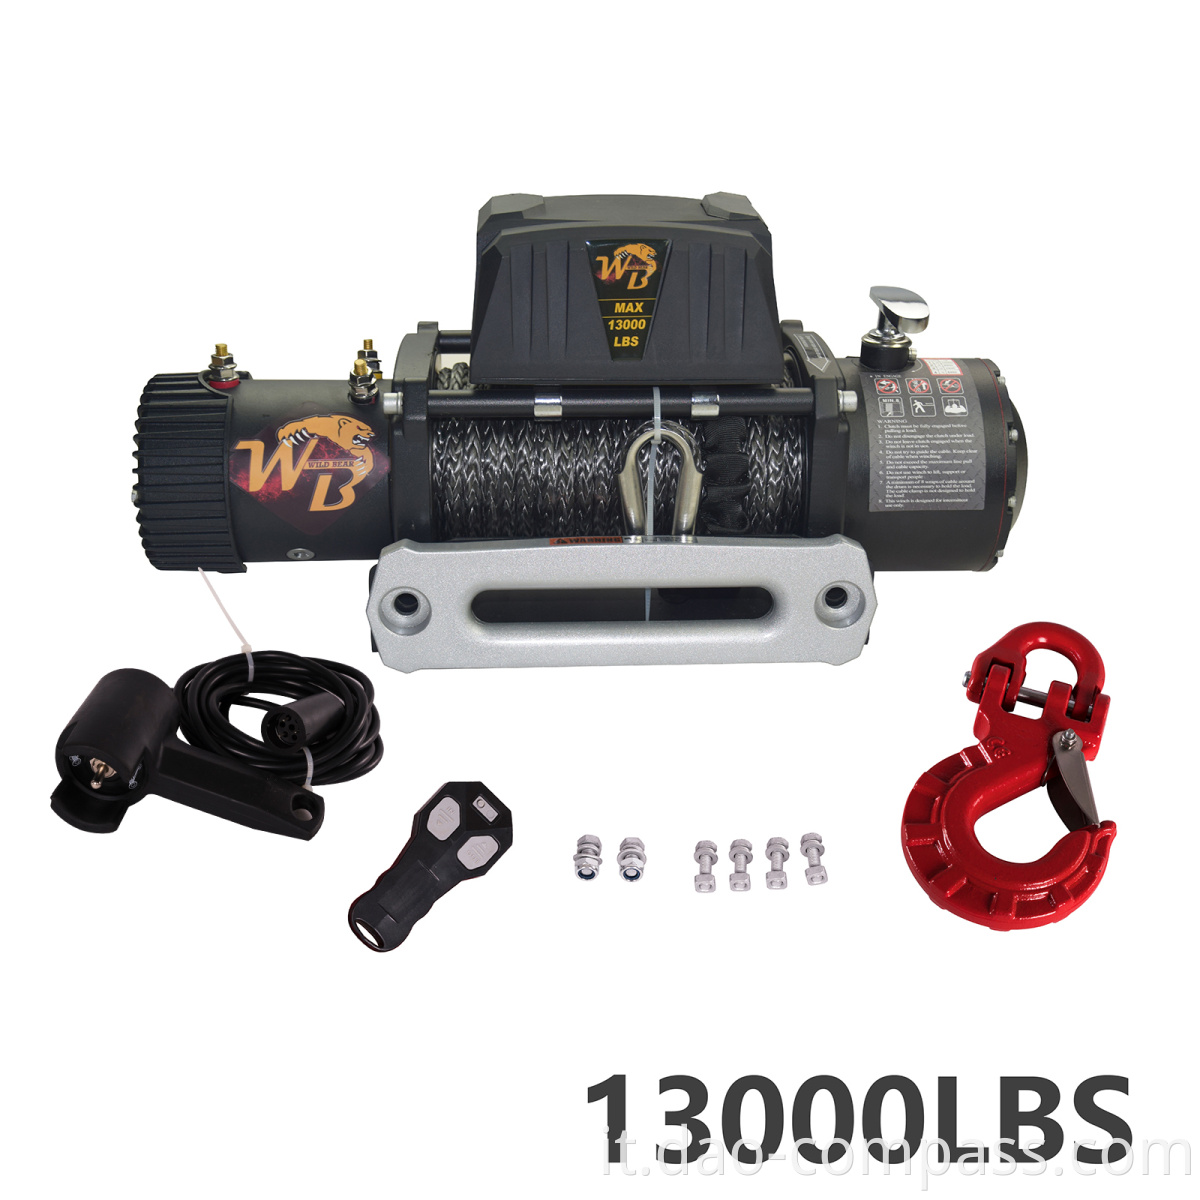 5t electric winch